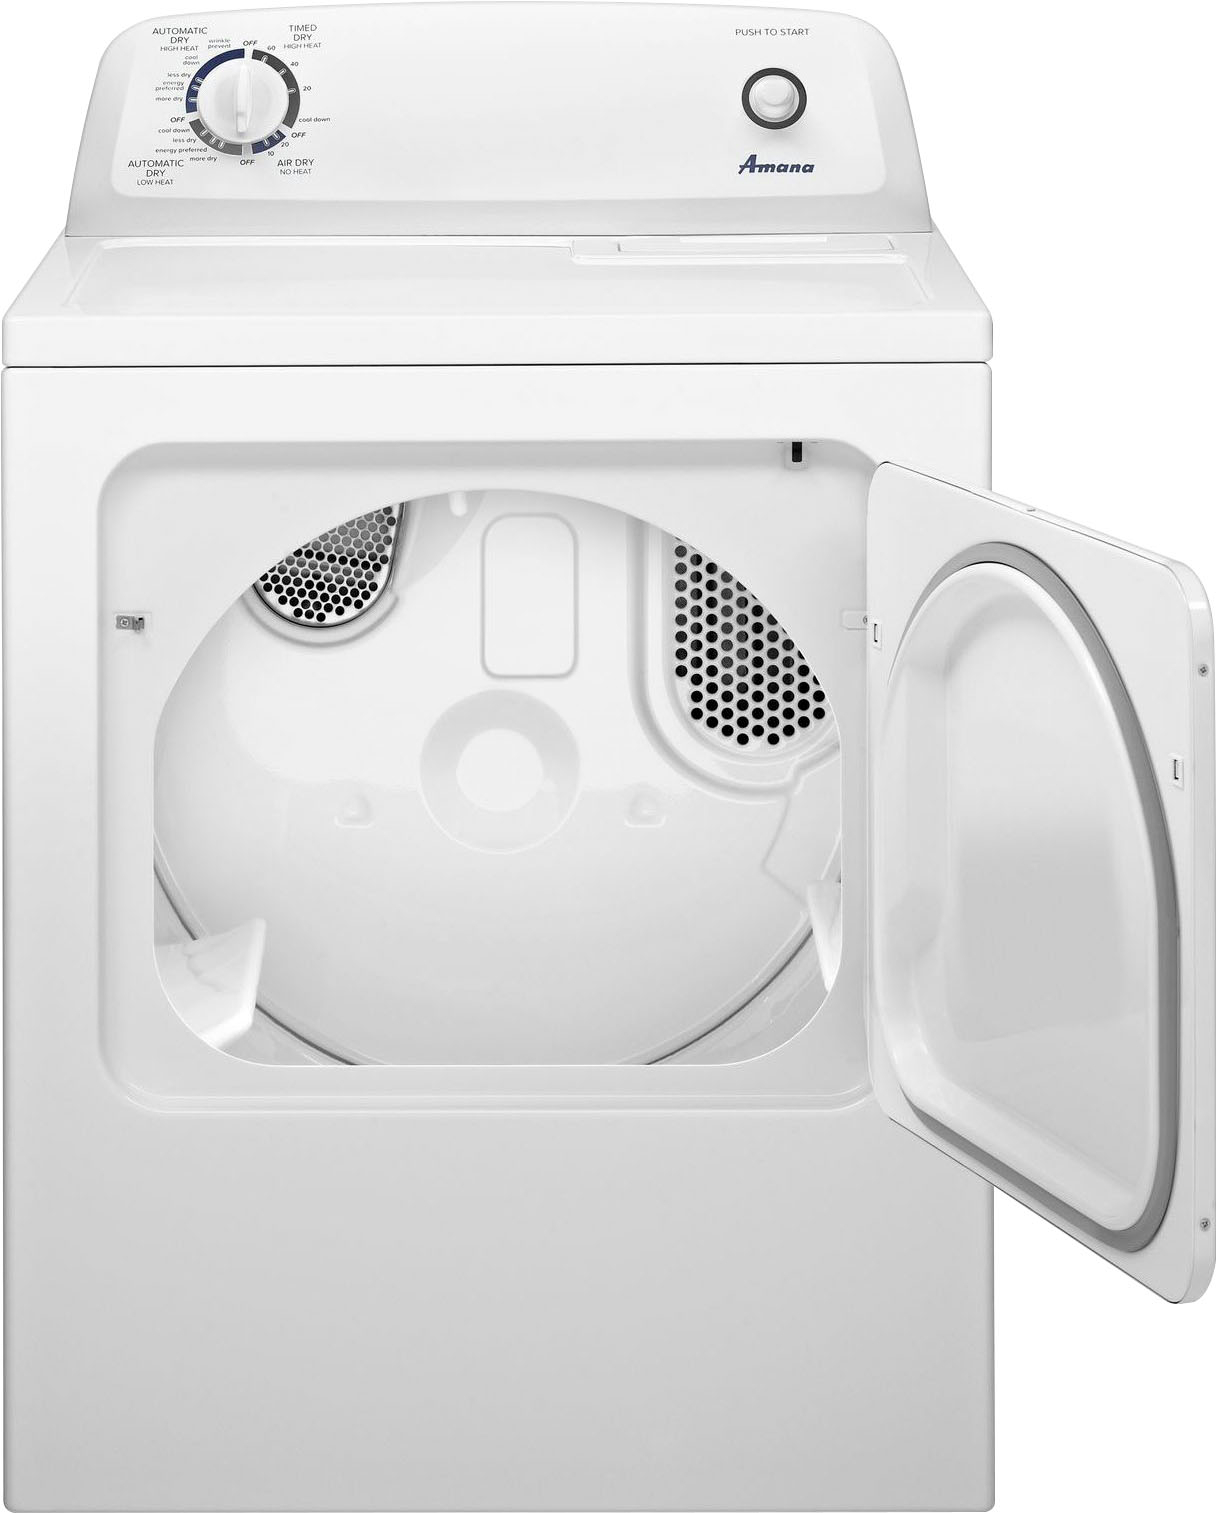 Angle View: Samsung - 7.5 Cu. Ft. Stackable Gas Dryer with Sensor Dry - White